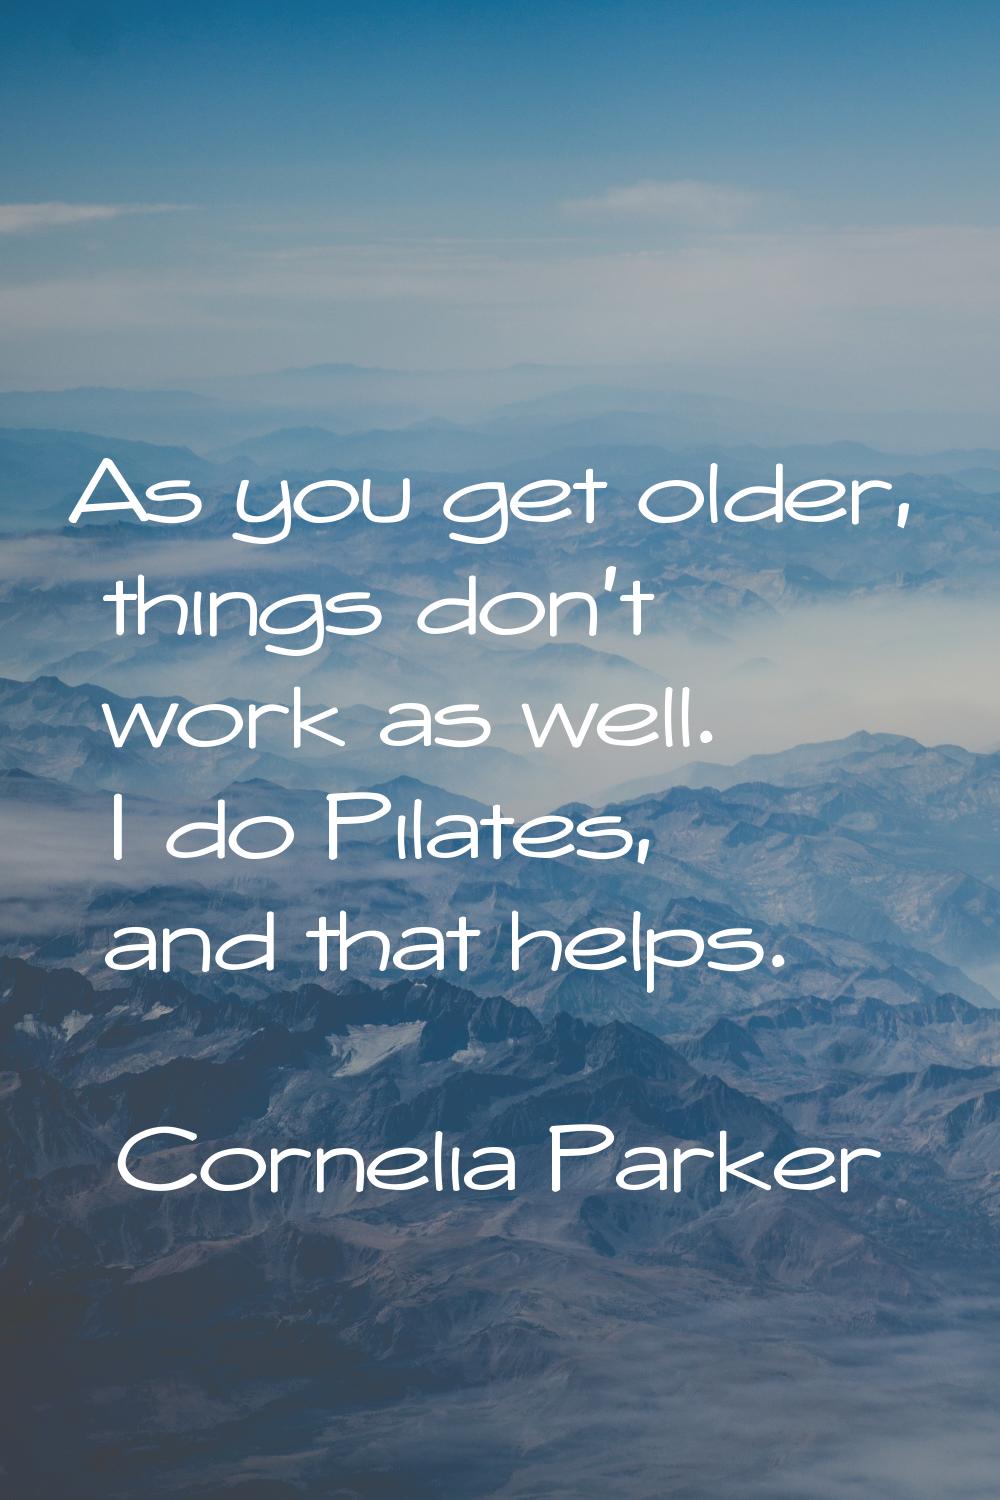 As you get older, things don't work as well. I do Pilates, and that helps.